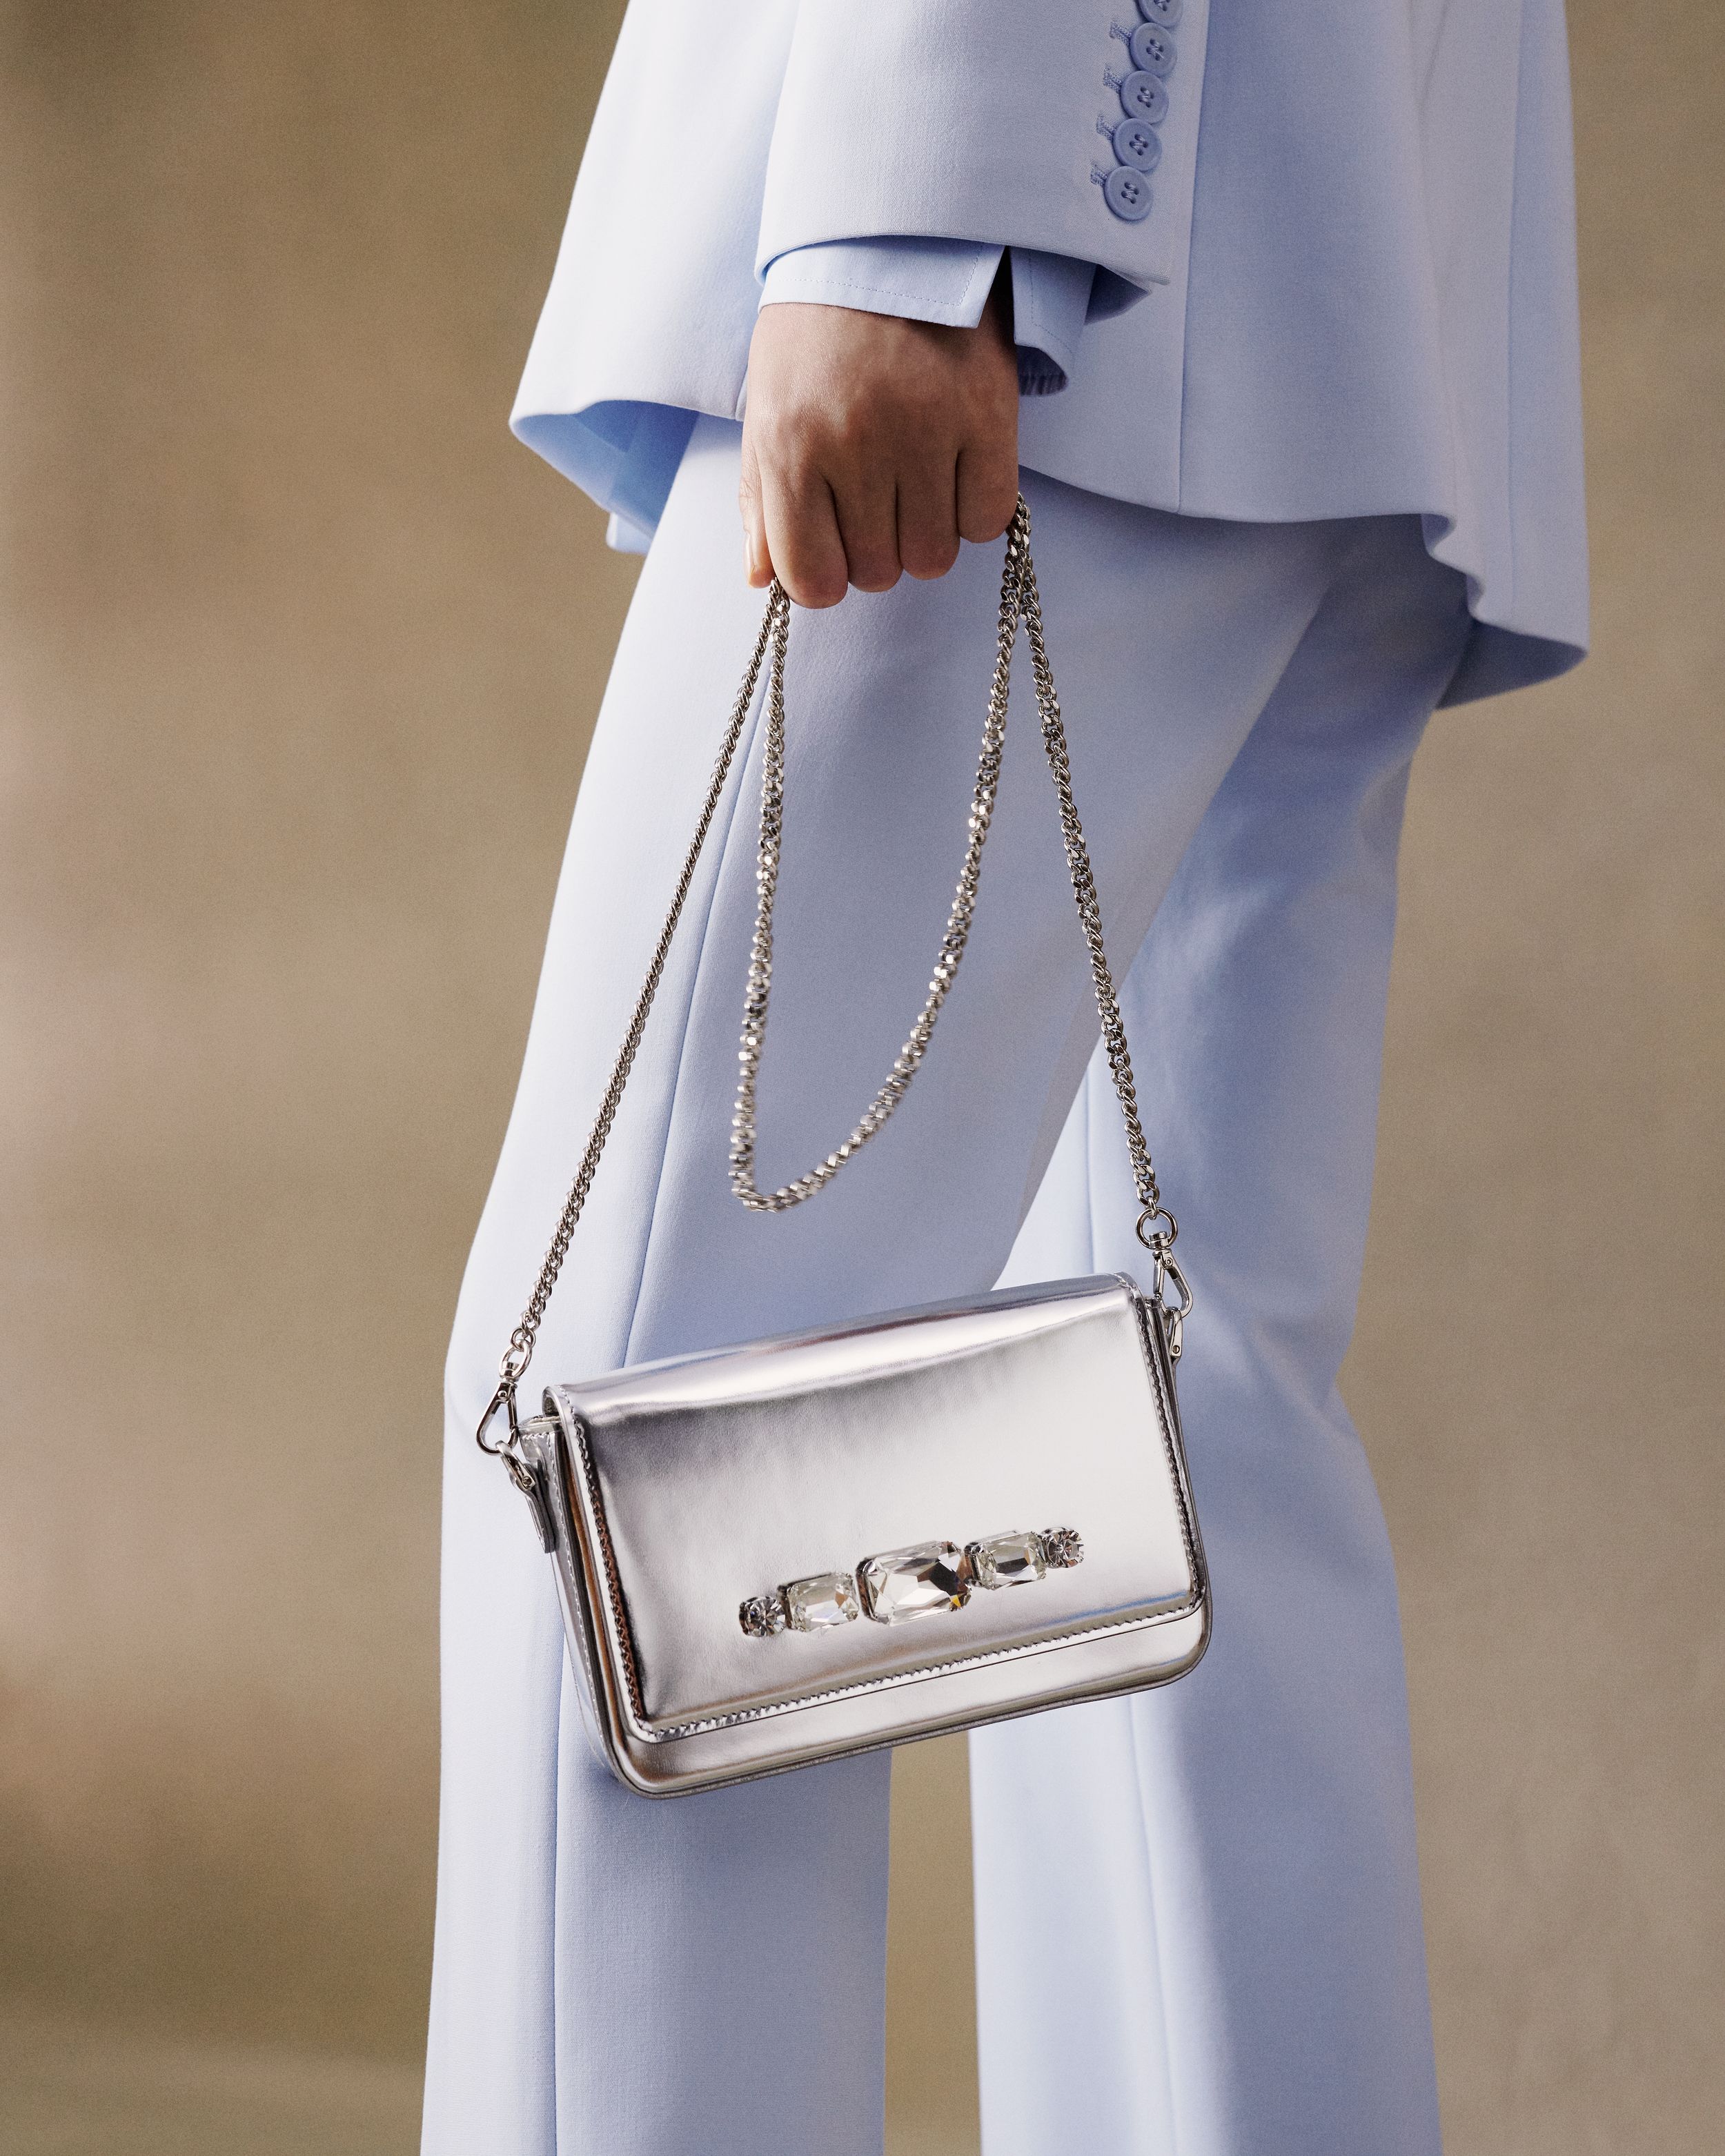 Silver leather bag being held by a model wearing a matching light blue suit